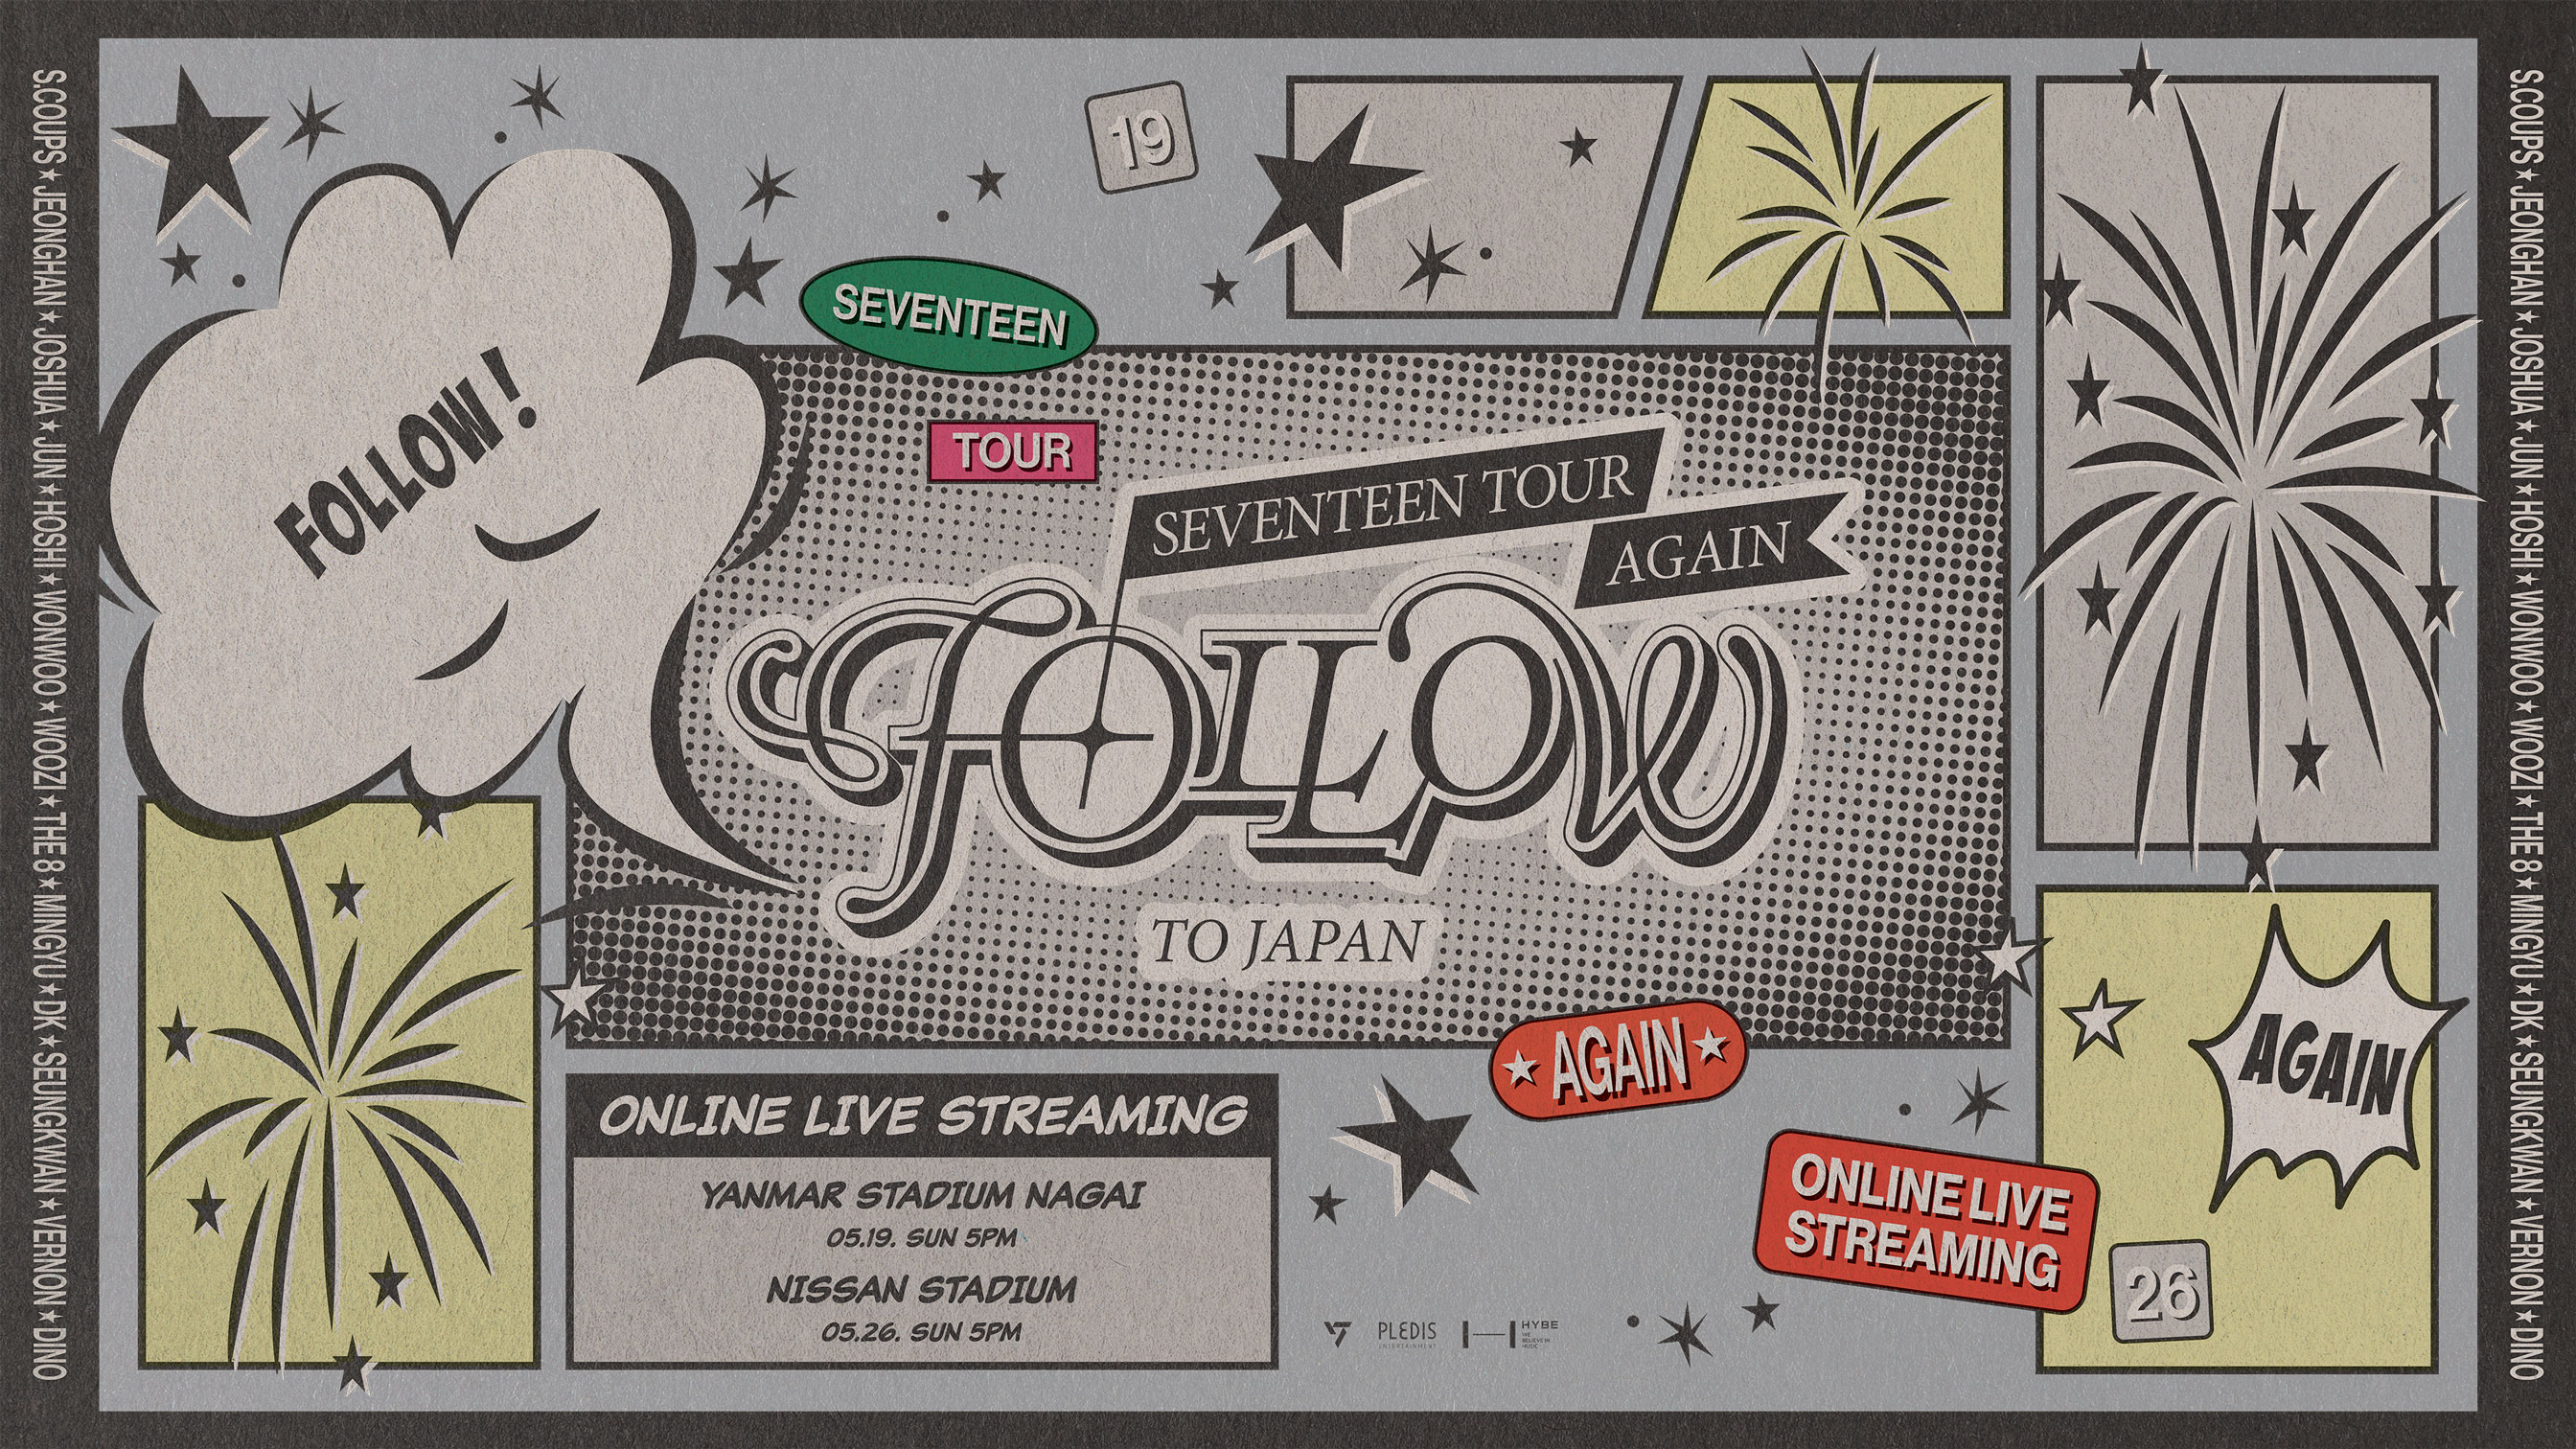 SEVENTEEN TOUR 'FOLLOW' AGAIN TO JAPAN Online Live Streaming